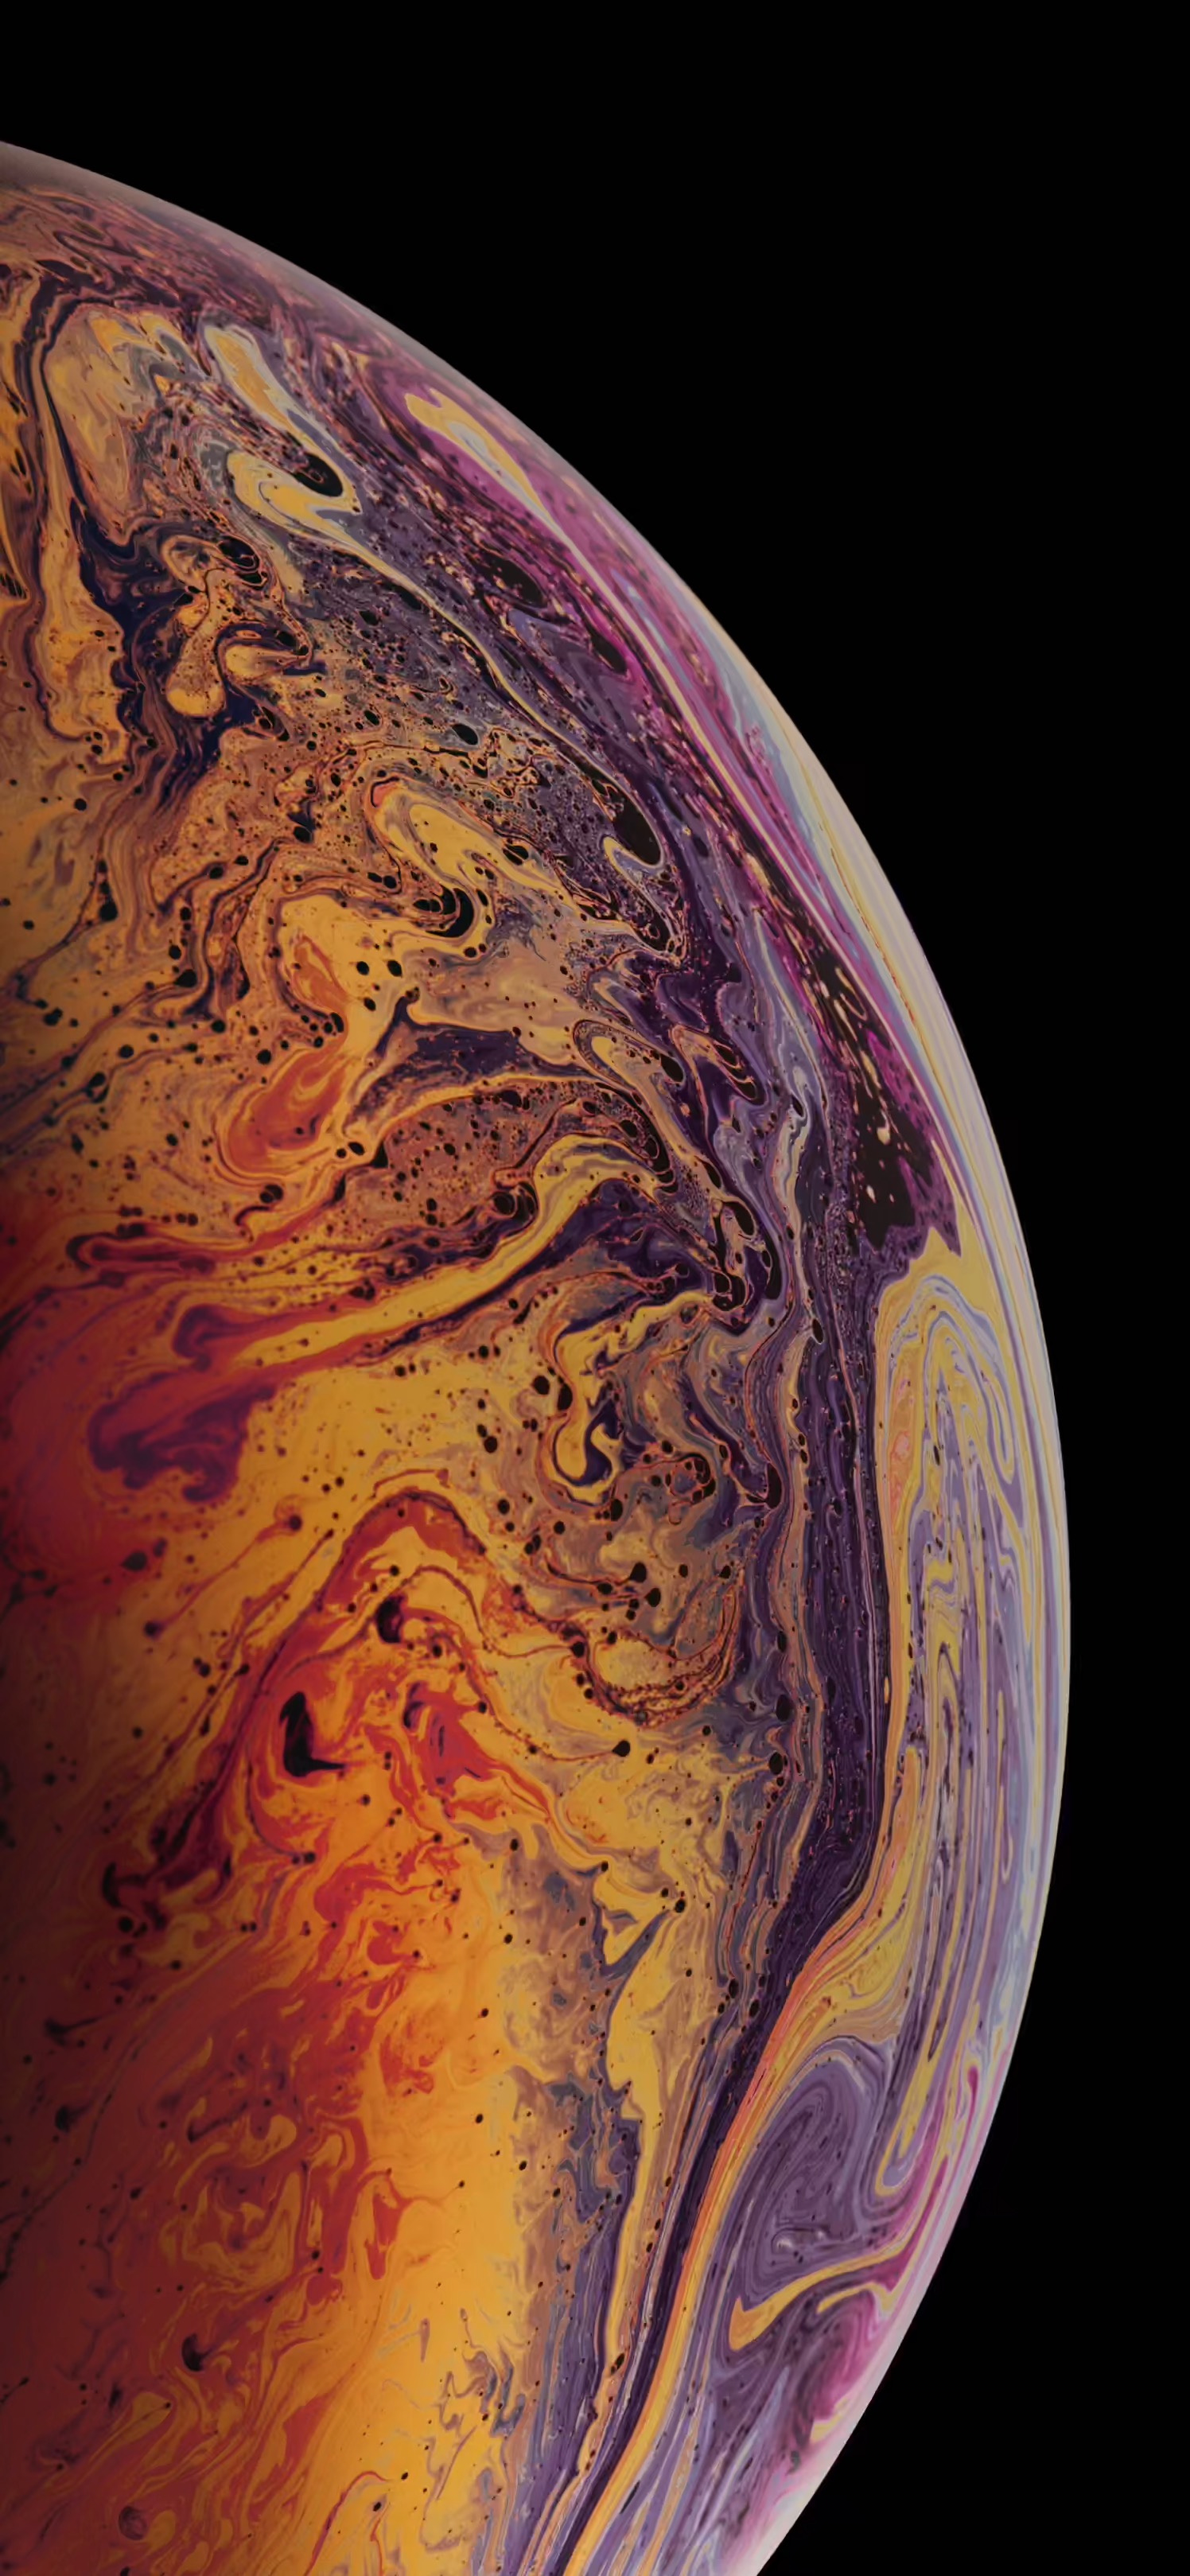 animated wallpaper iphone xs max